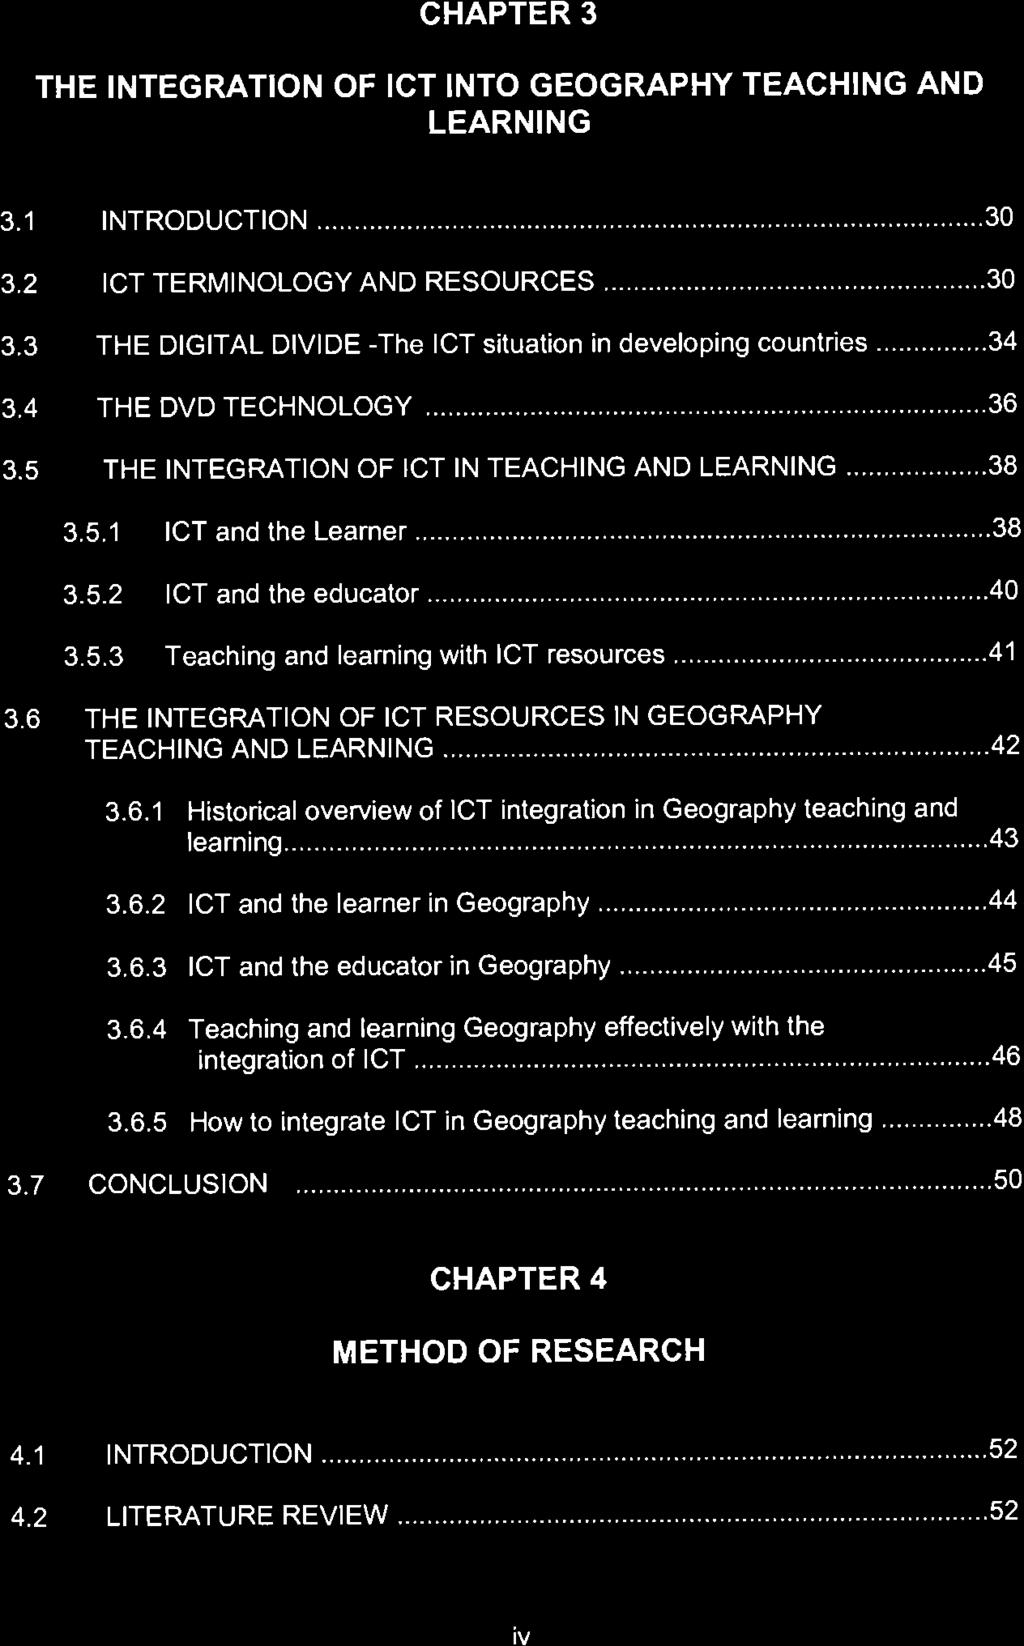 CHAPTER 3 THE INTEGRATION OF ICT INTO GEOGRAPHY TEACHING AND LEARNING 3.1 INTRODUCTION... 30 3.2 ICT TERMINOLOGY AND RESOURCES... 30 3.3 THE DIGITAL DIVIDE -The 1CT situation in developing countries.